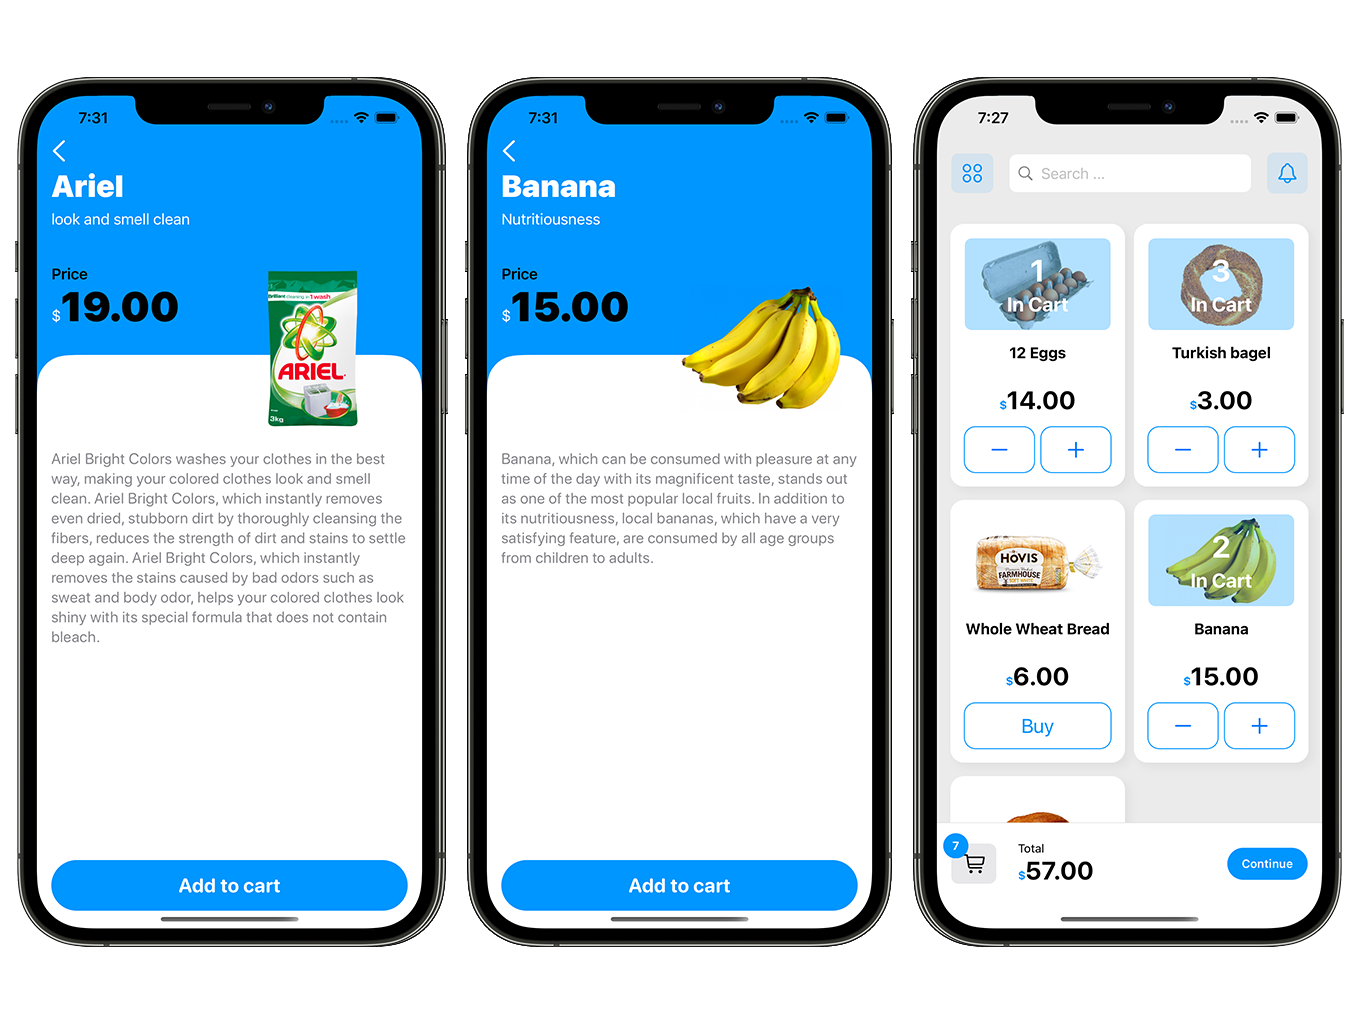 SwiftUI Grocery App | Woocommerce Full iOS Application - 5